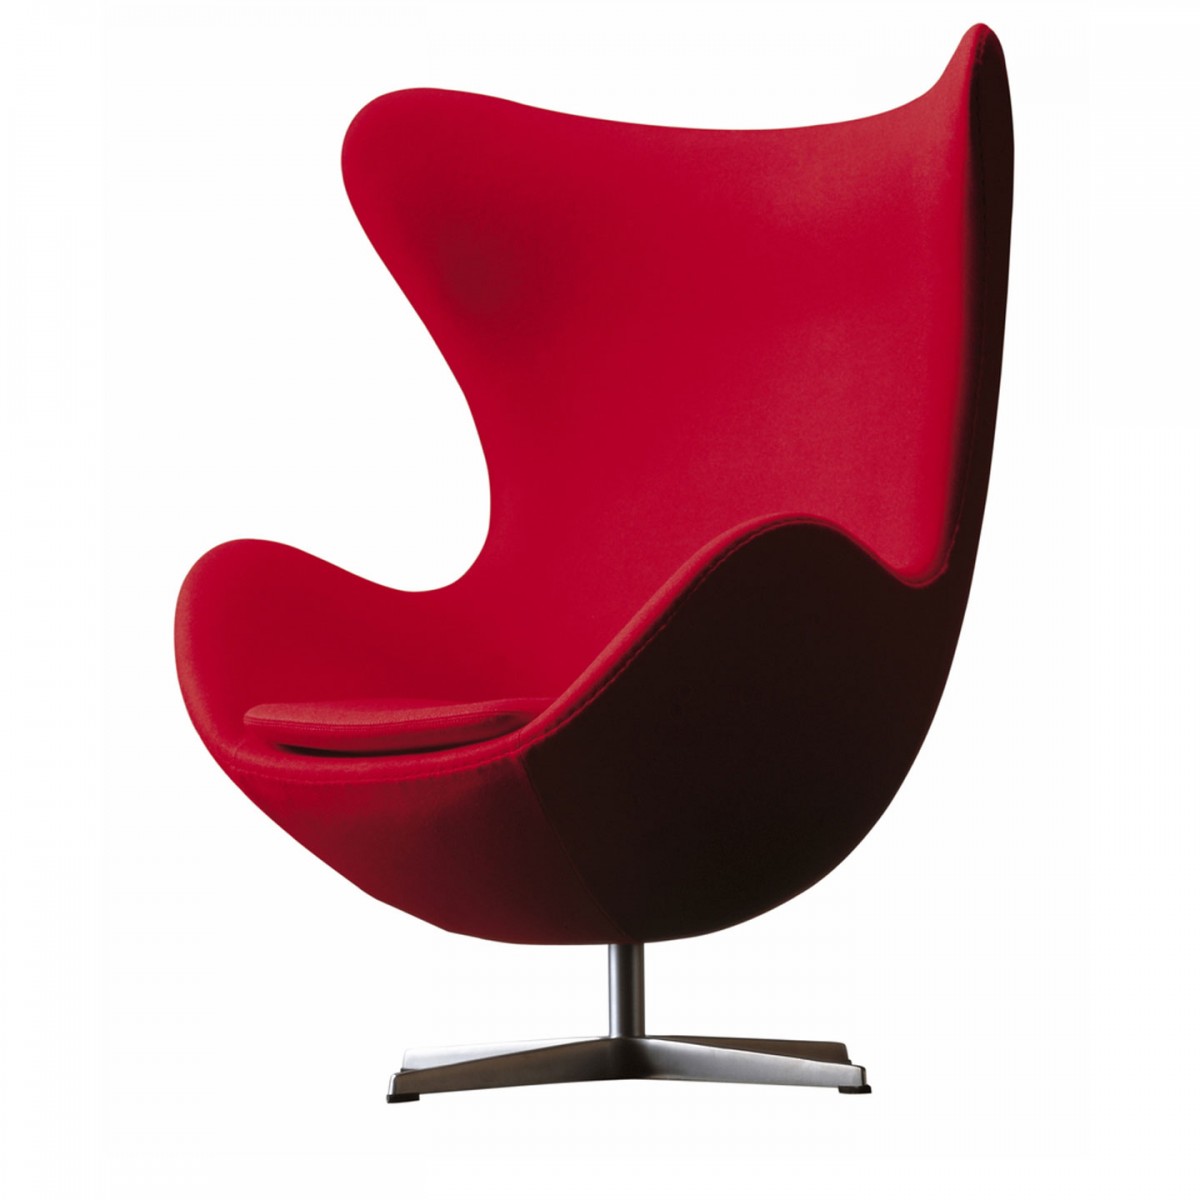 Egg Chair (1958) by Arne Jacobsen. As reproduced in Chair: 500 Designs that Matter